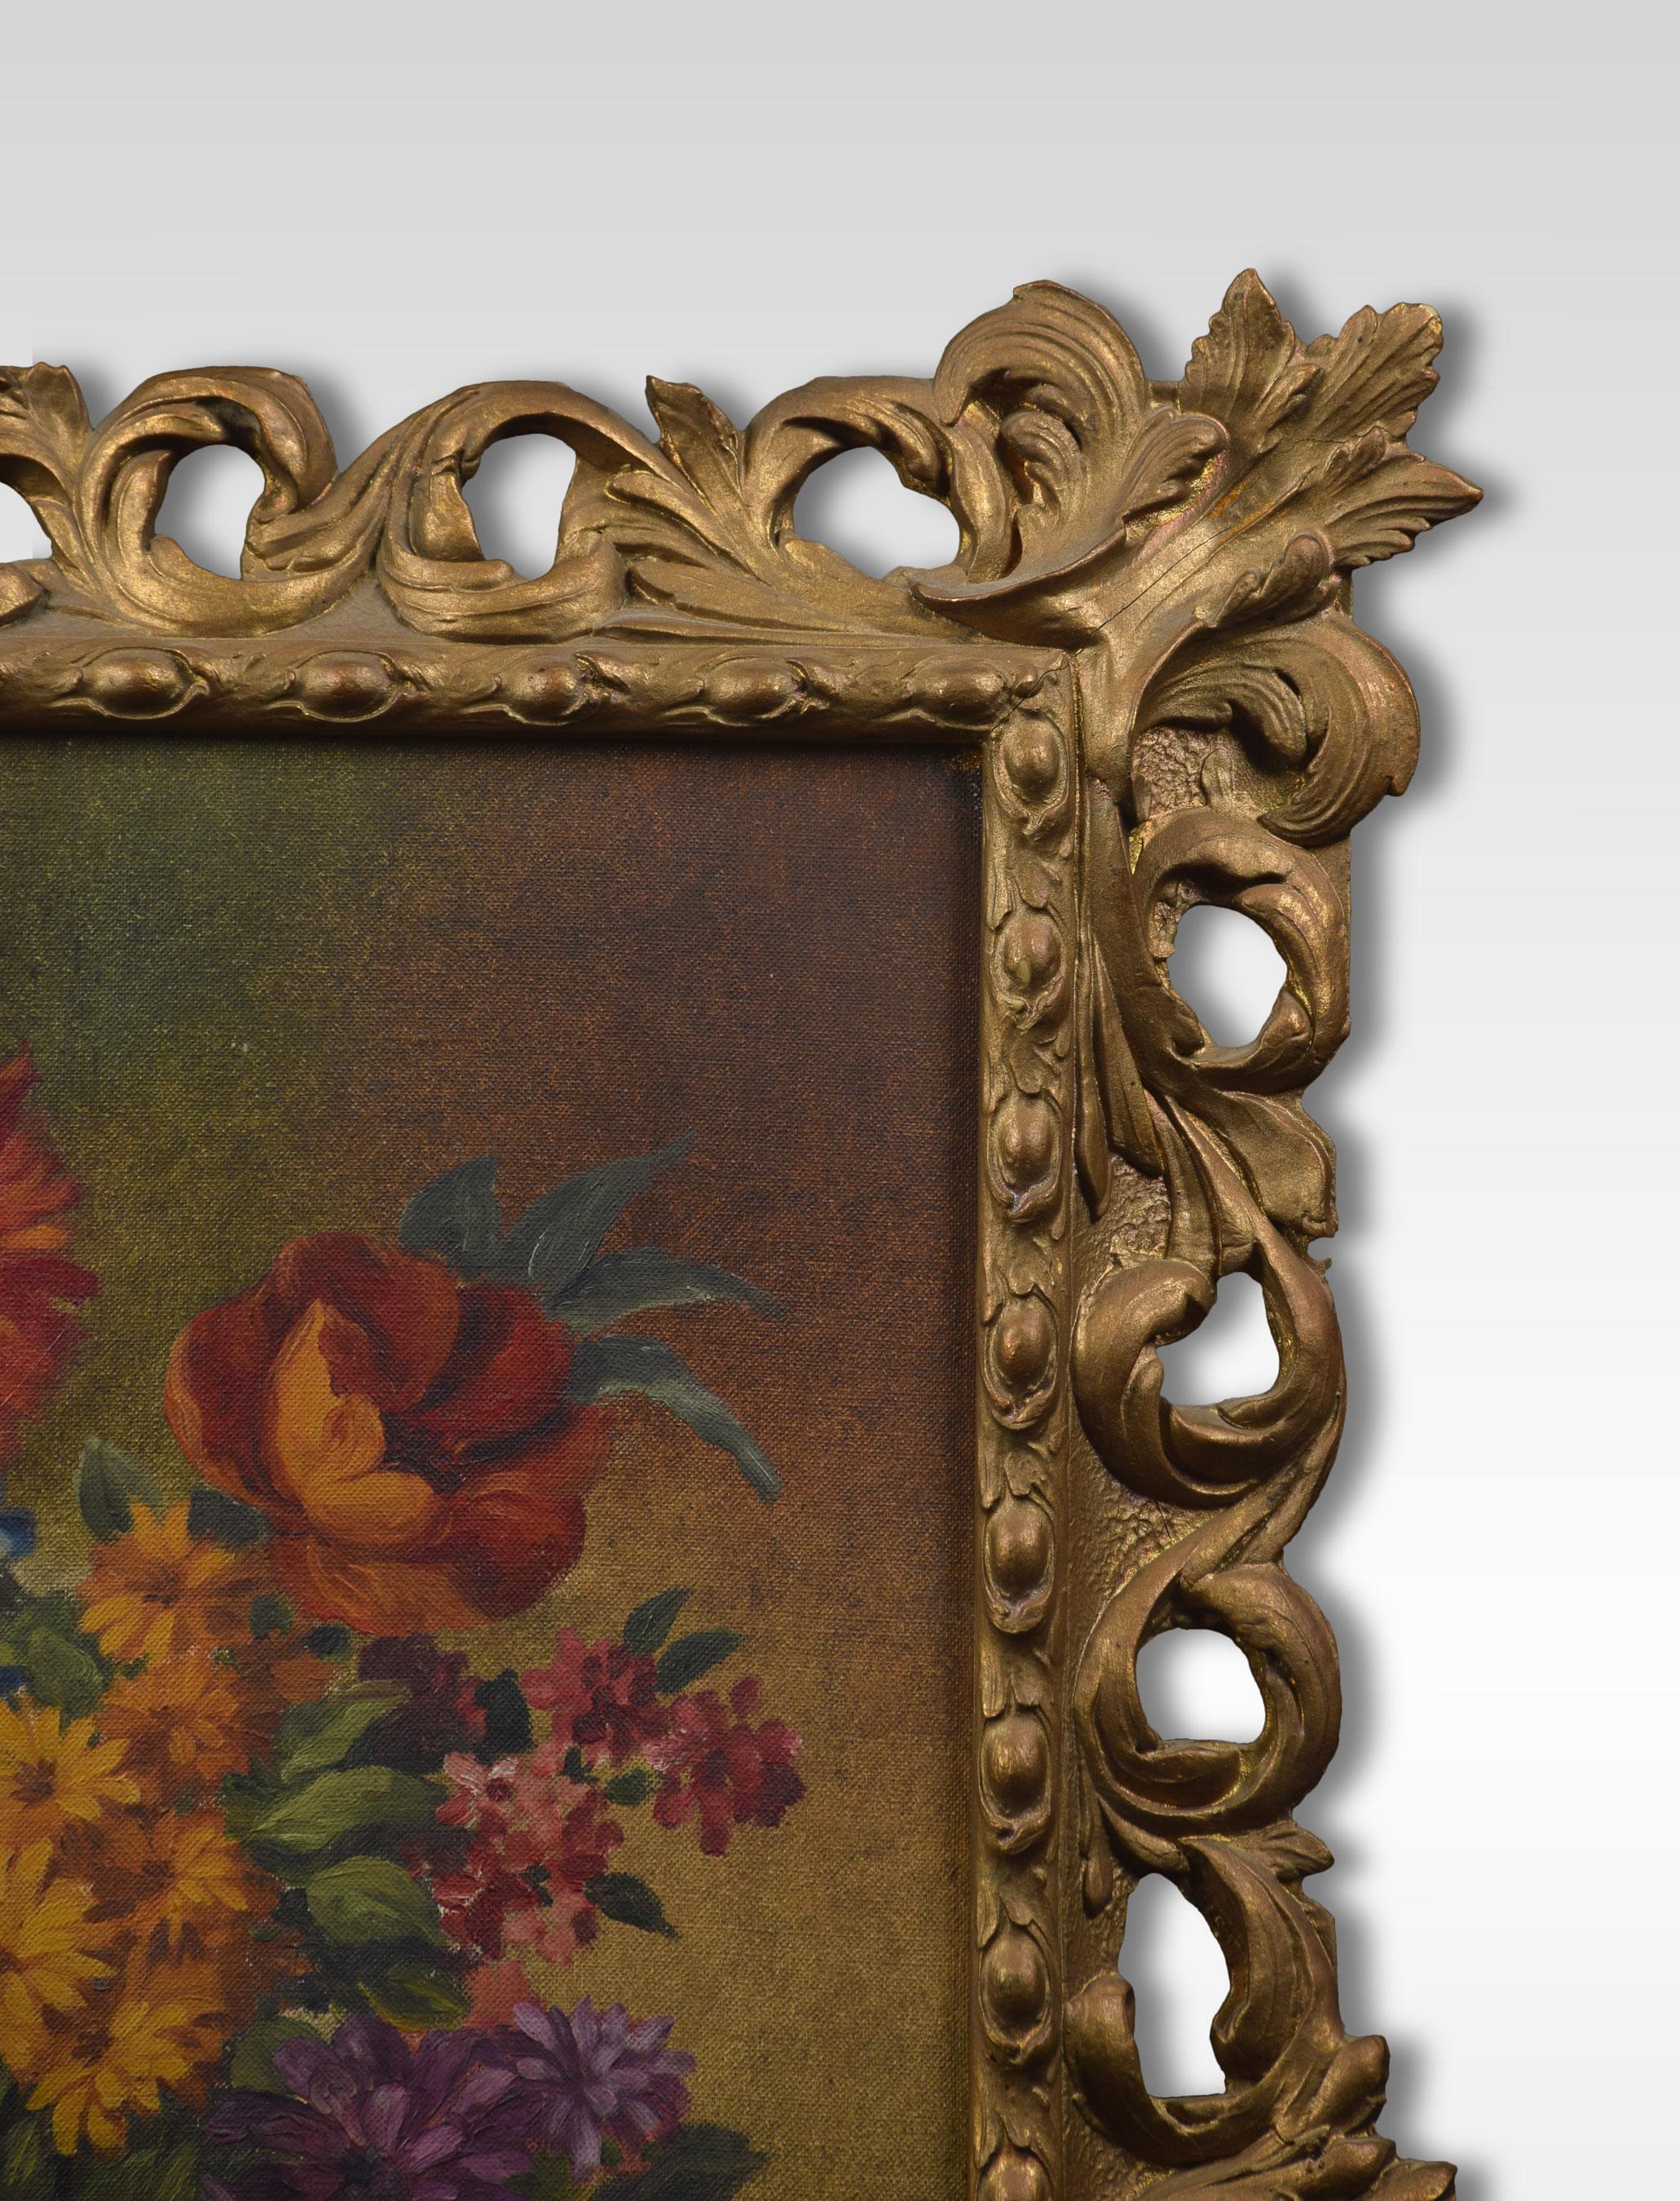 Still life of flowers signed J van Neesen encased in gilt frame.
Dimensions
Height 31.5 inches
Width 28 inches
Depth 1.5 inches.